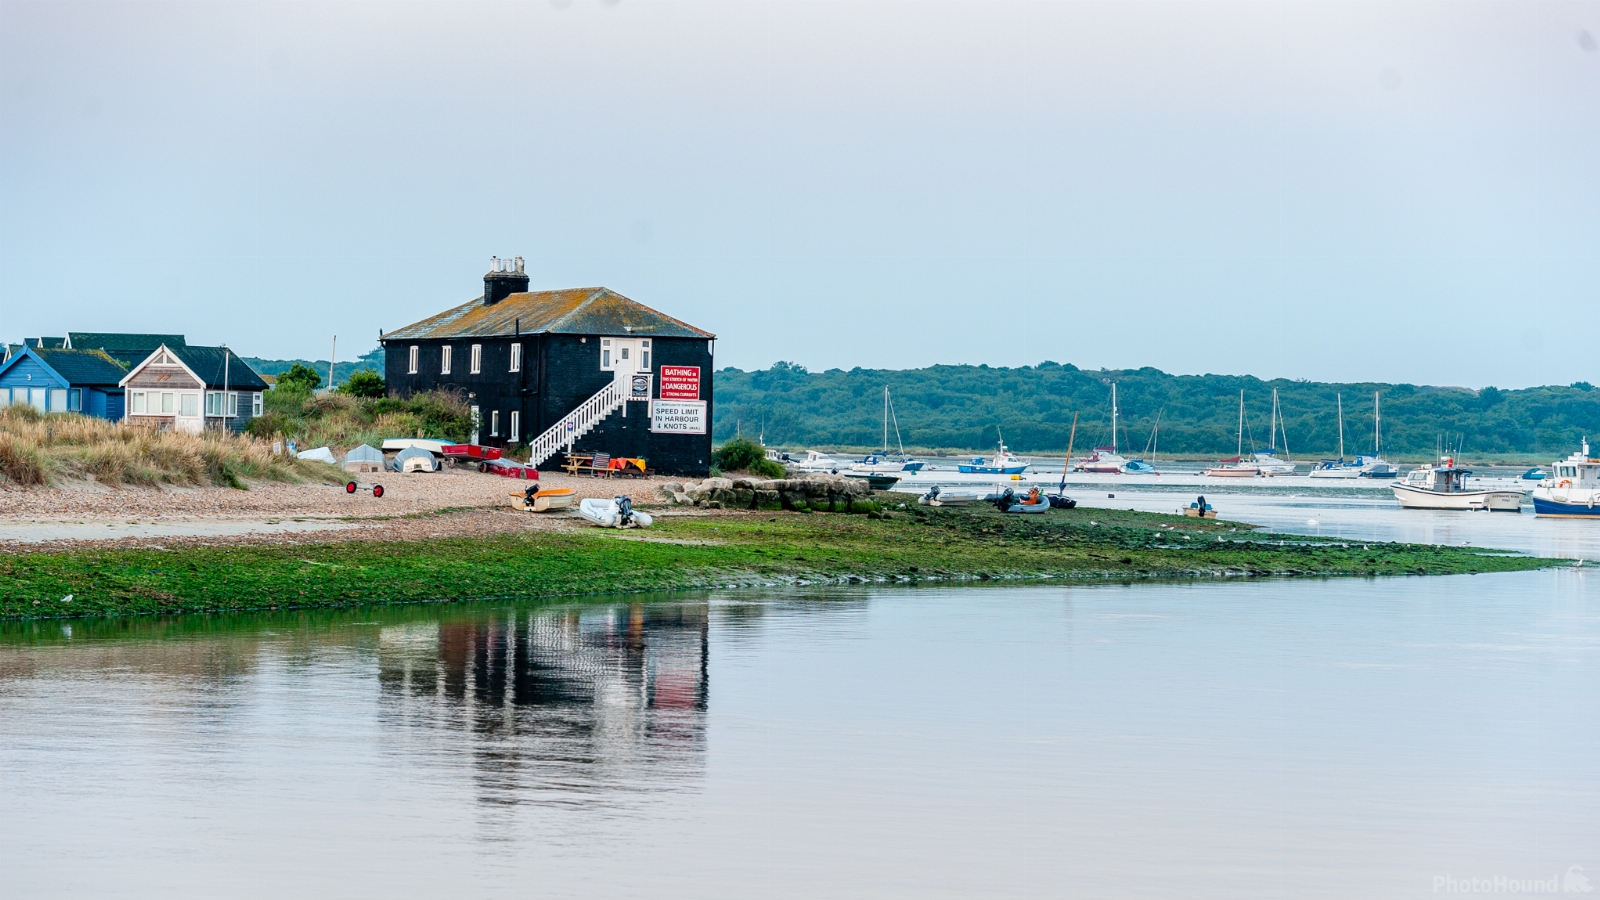 Image of Mudeford Quay by Brian Butcher